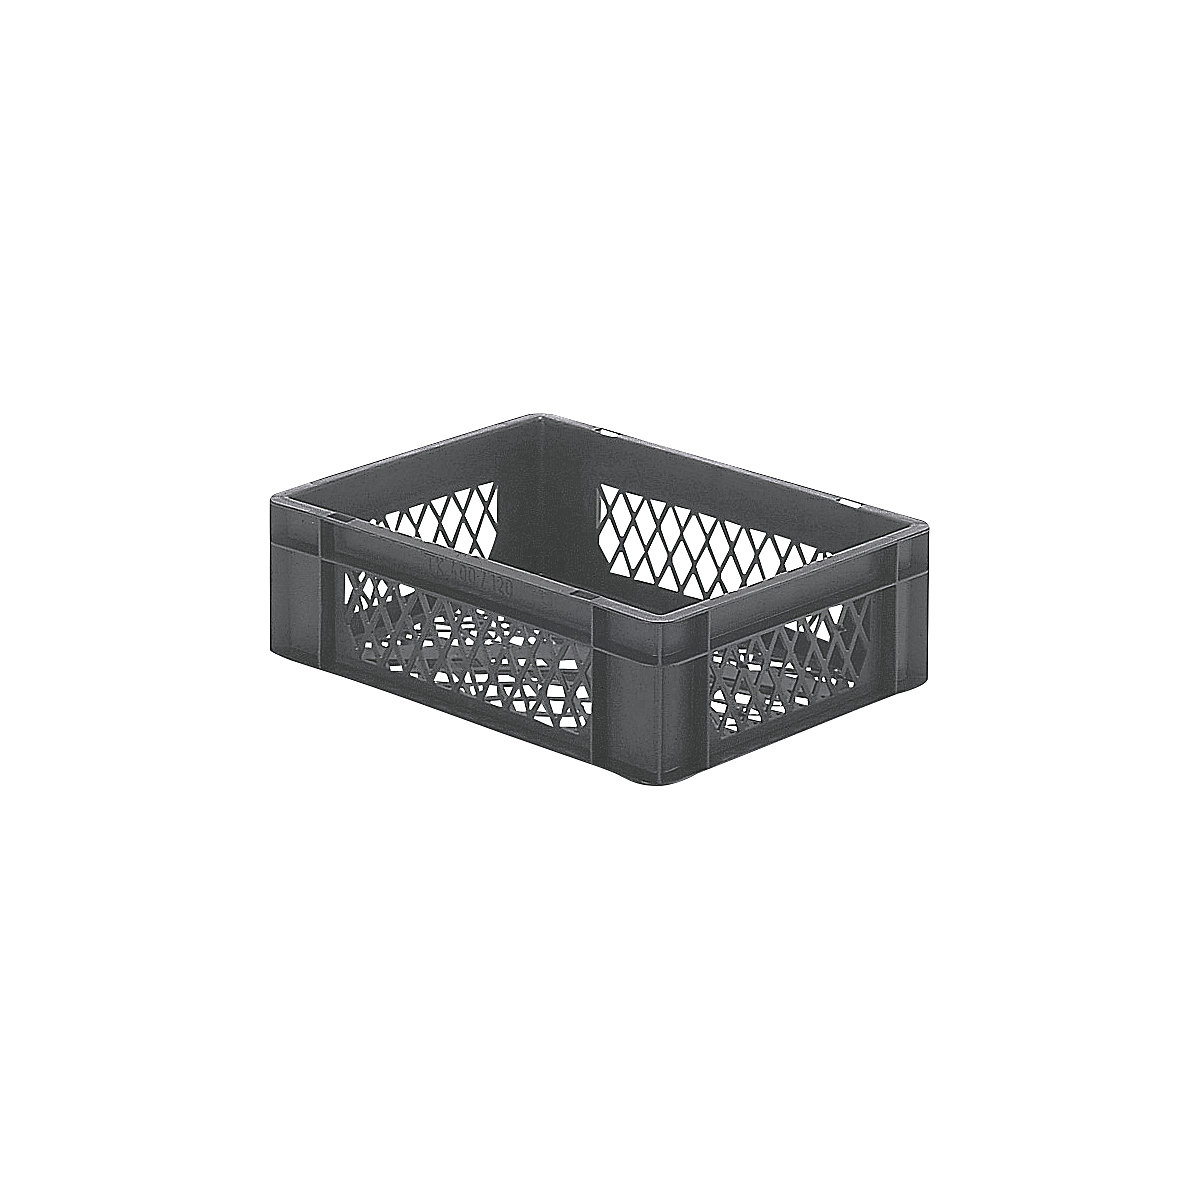 Euro stacking container, perforated walls and base, LxWxH 400 x 300 x 120 mm, grey, pack of 5